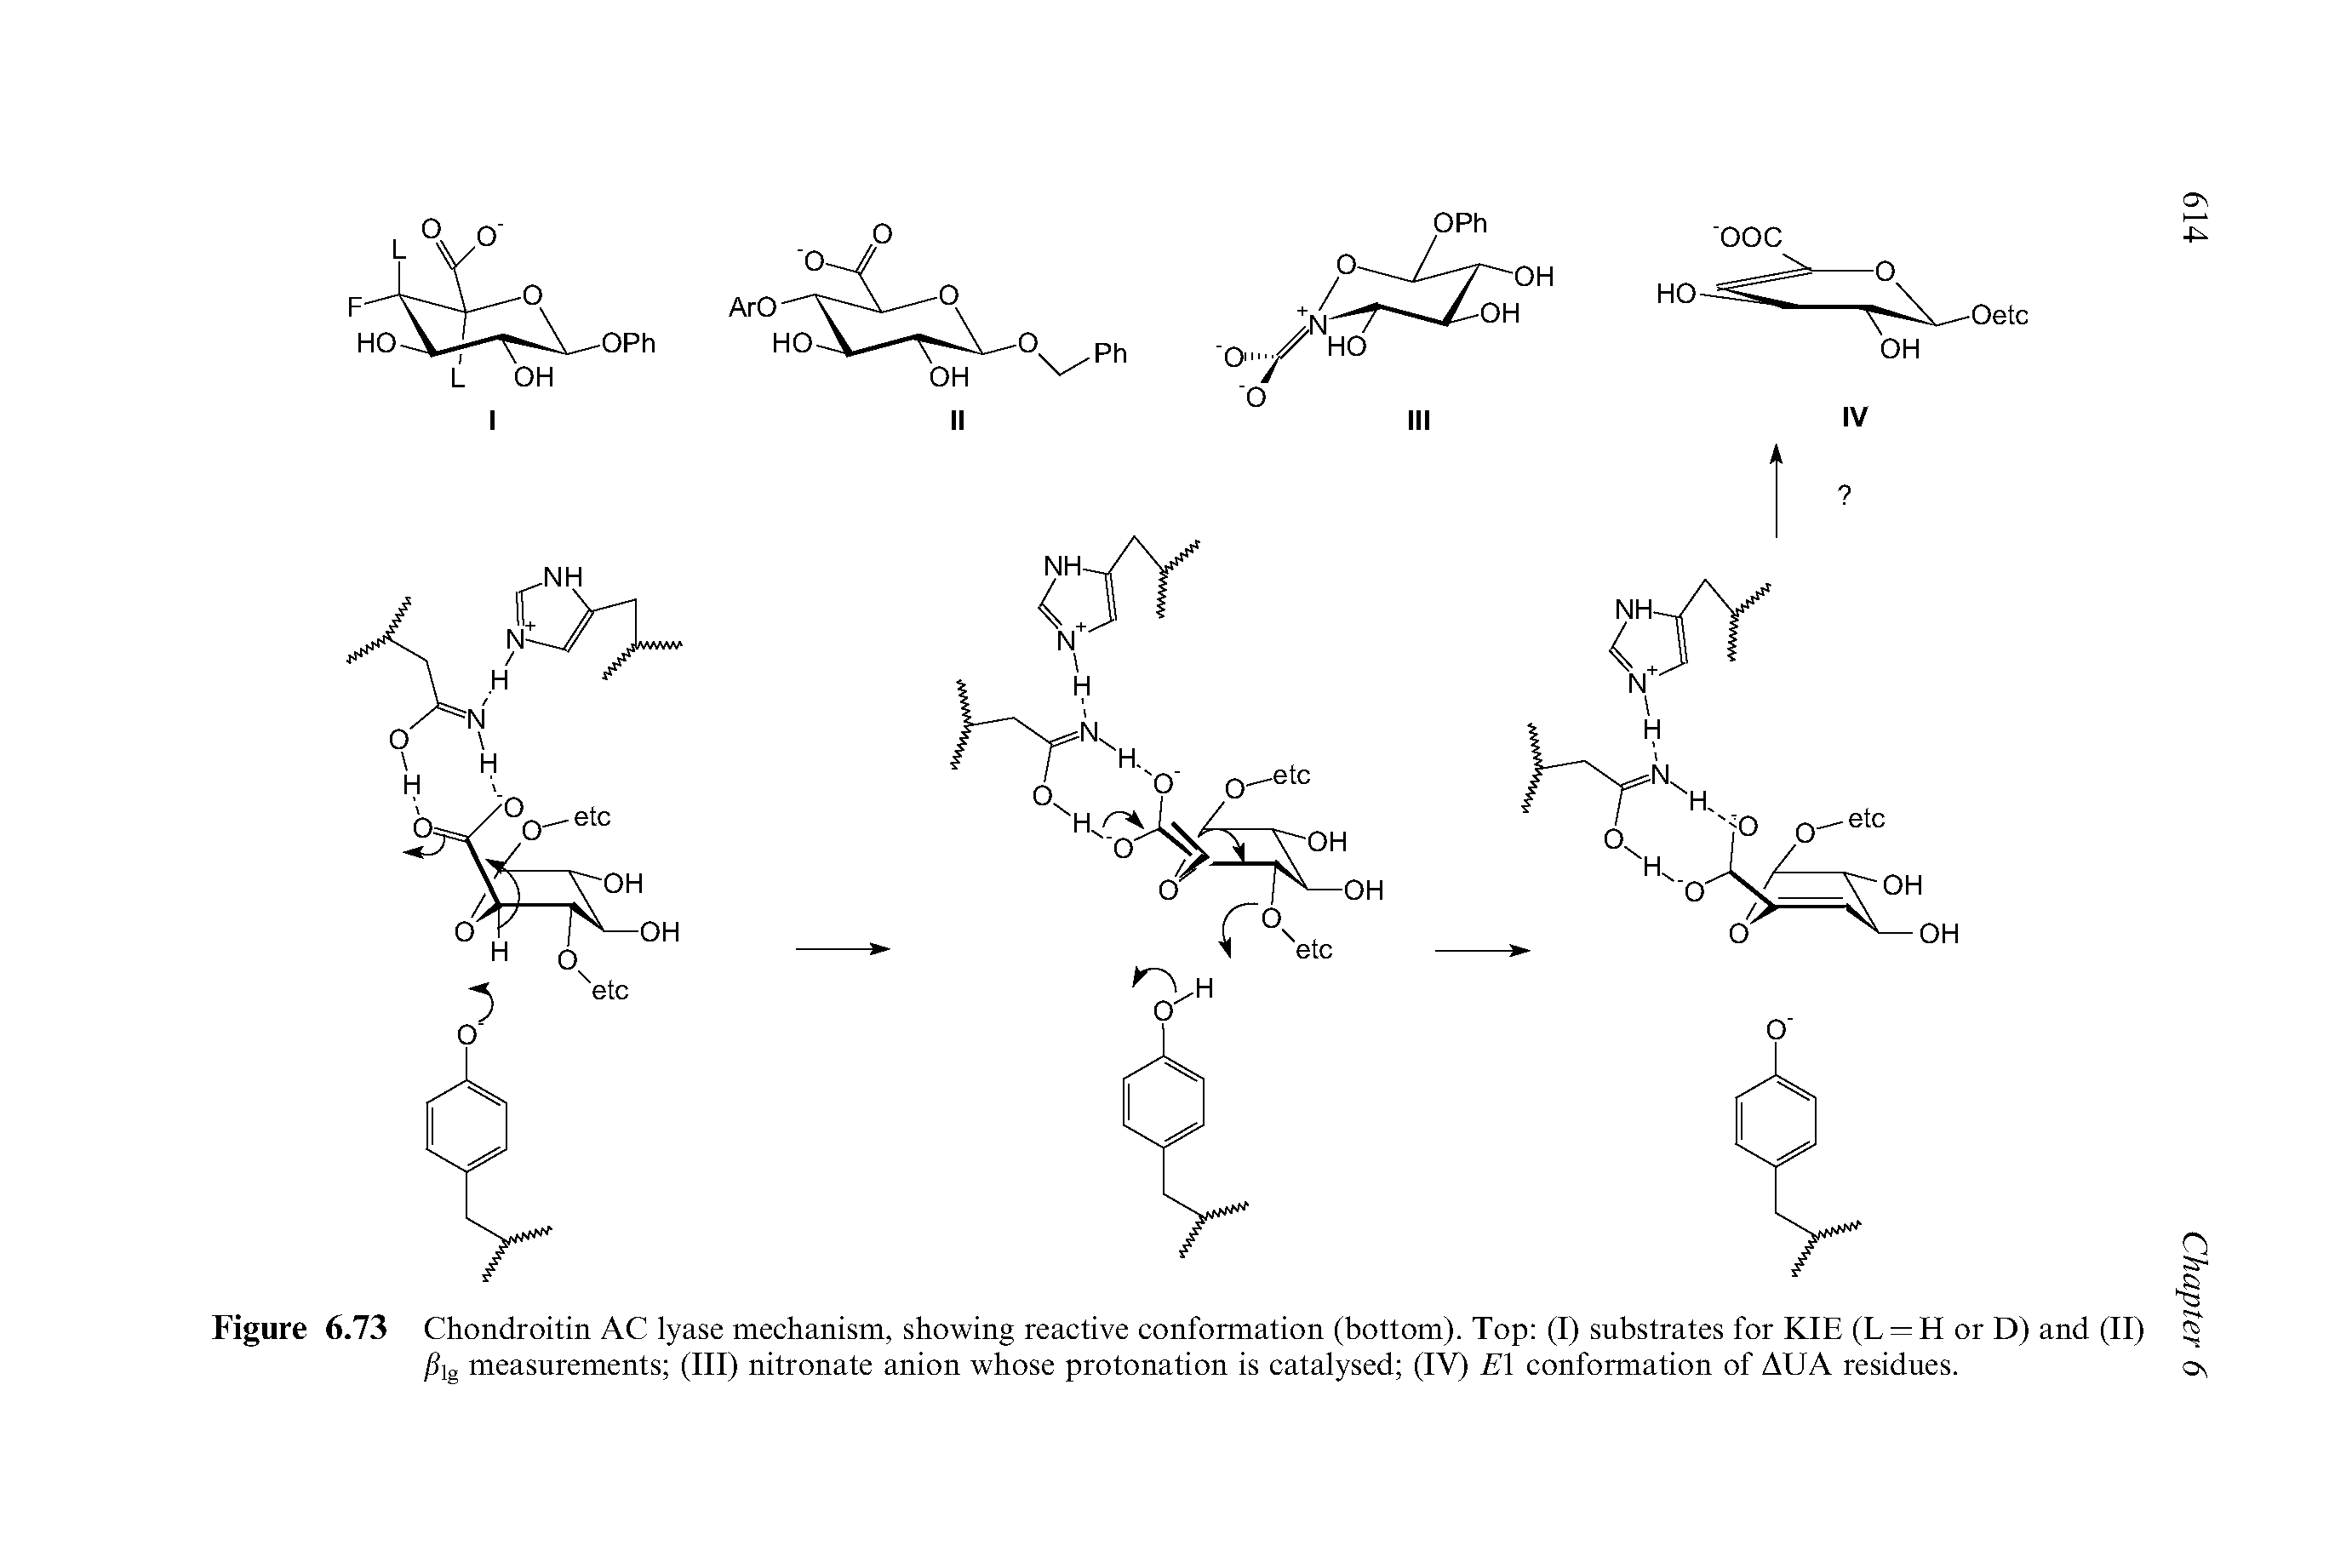 Figure 6.73 Chondroitin AC lyase mechanism, showing reactive conformation (bottom). Top (I) substrates for KIE (L = H or D) and (II)...